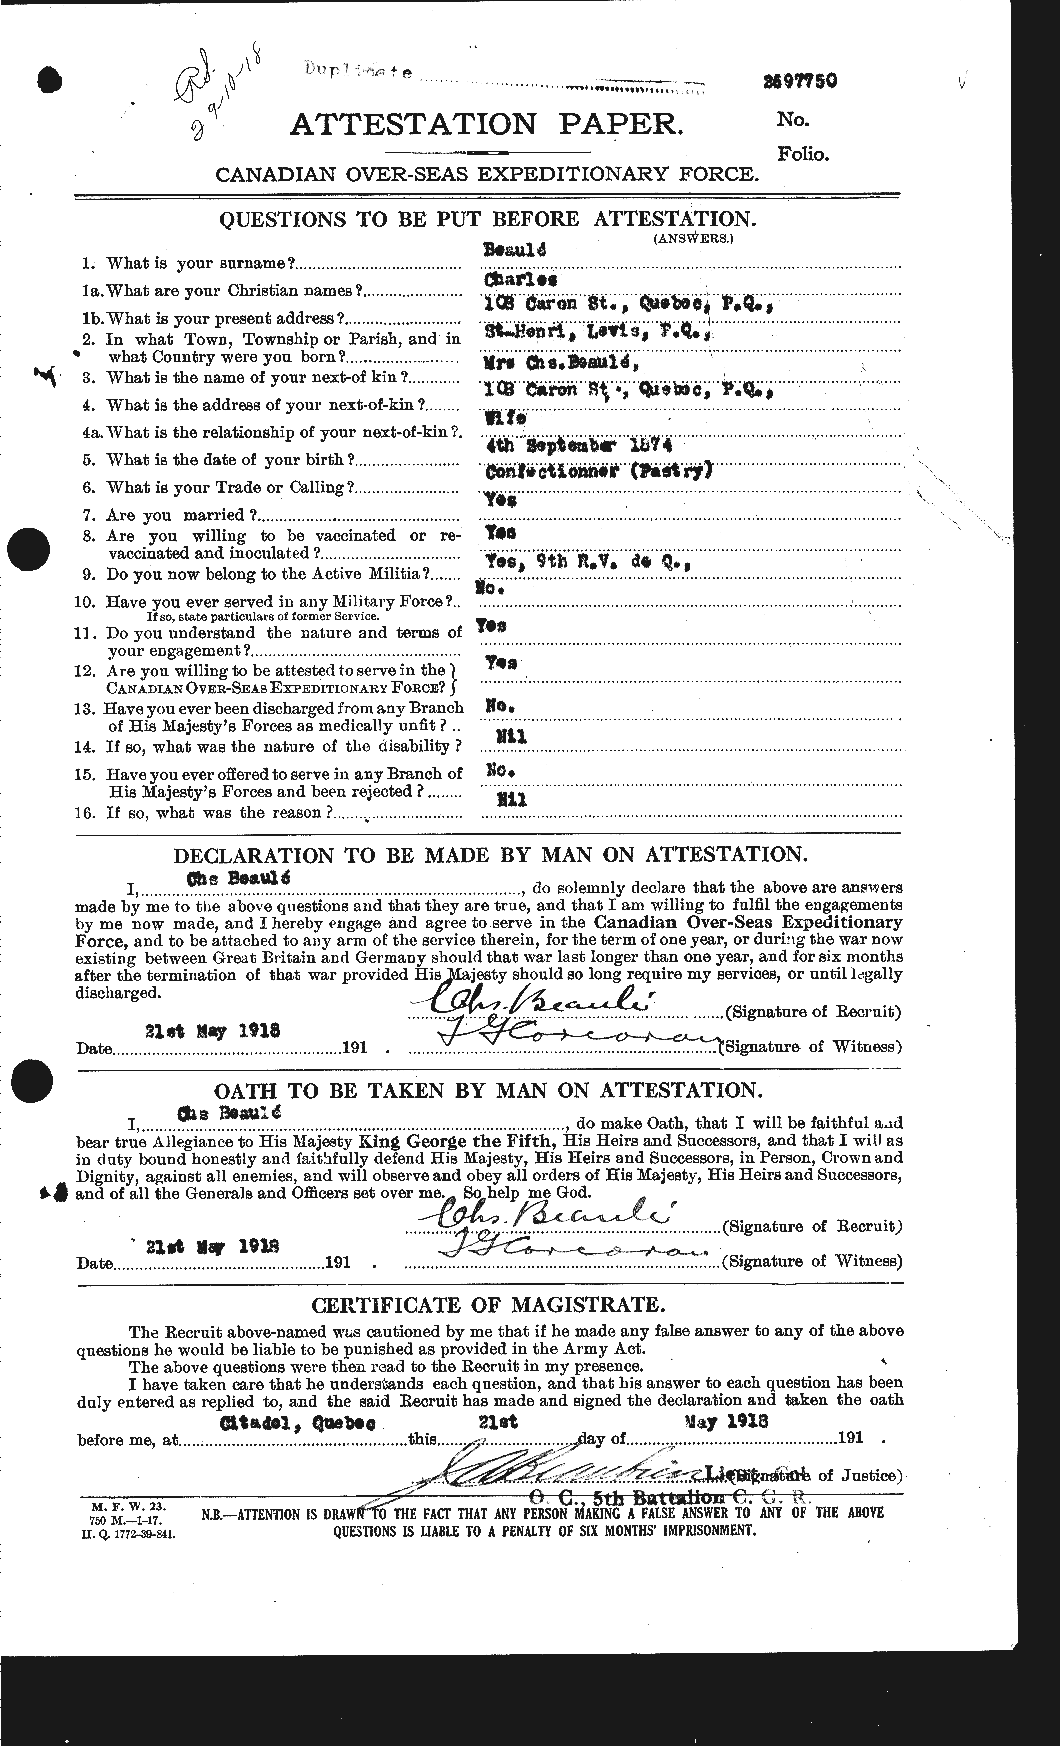 Personnel Records of the First World War - CEF 231434a